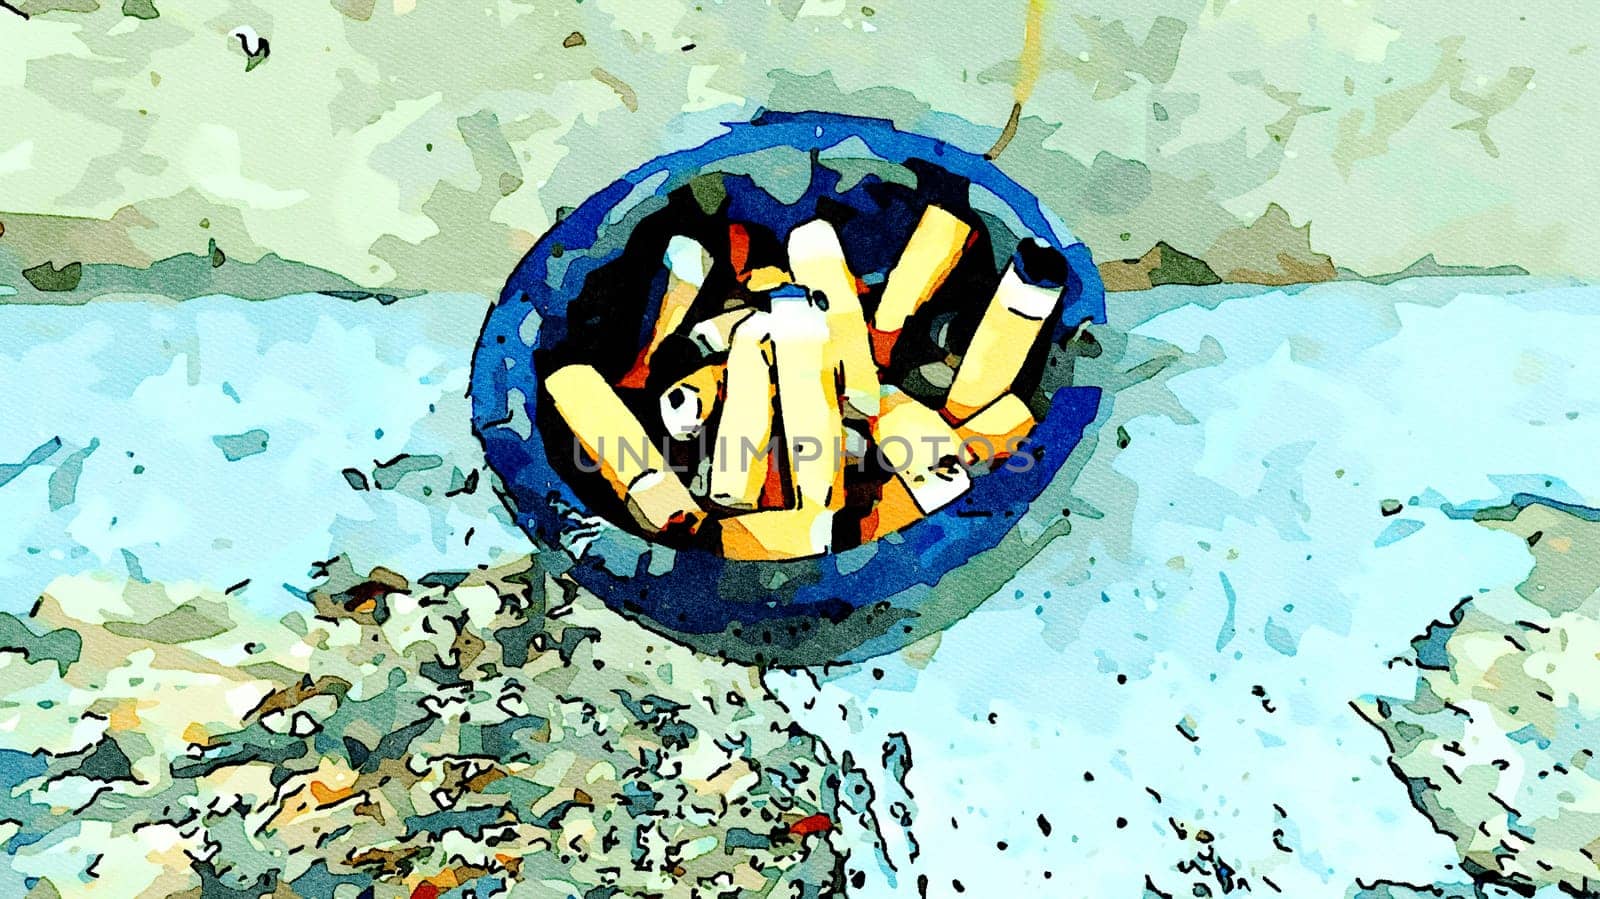 An ashtray full of spent butts on the ground along a wall on the street.